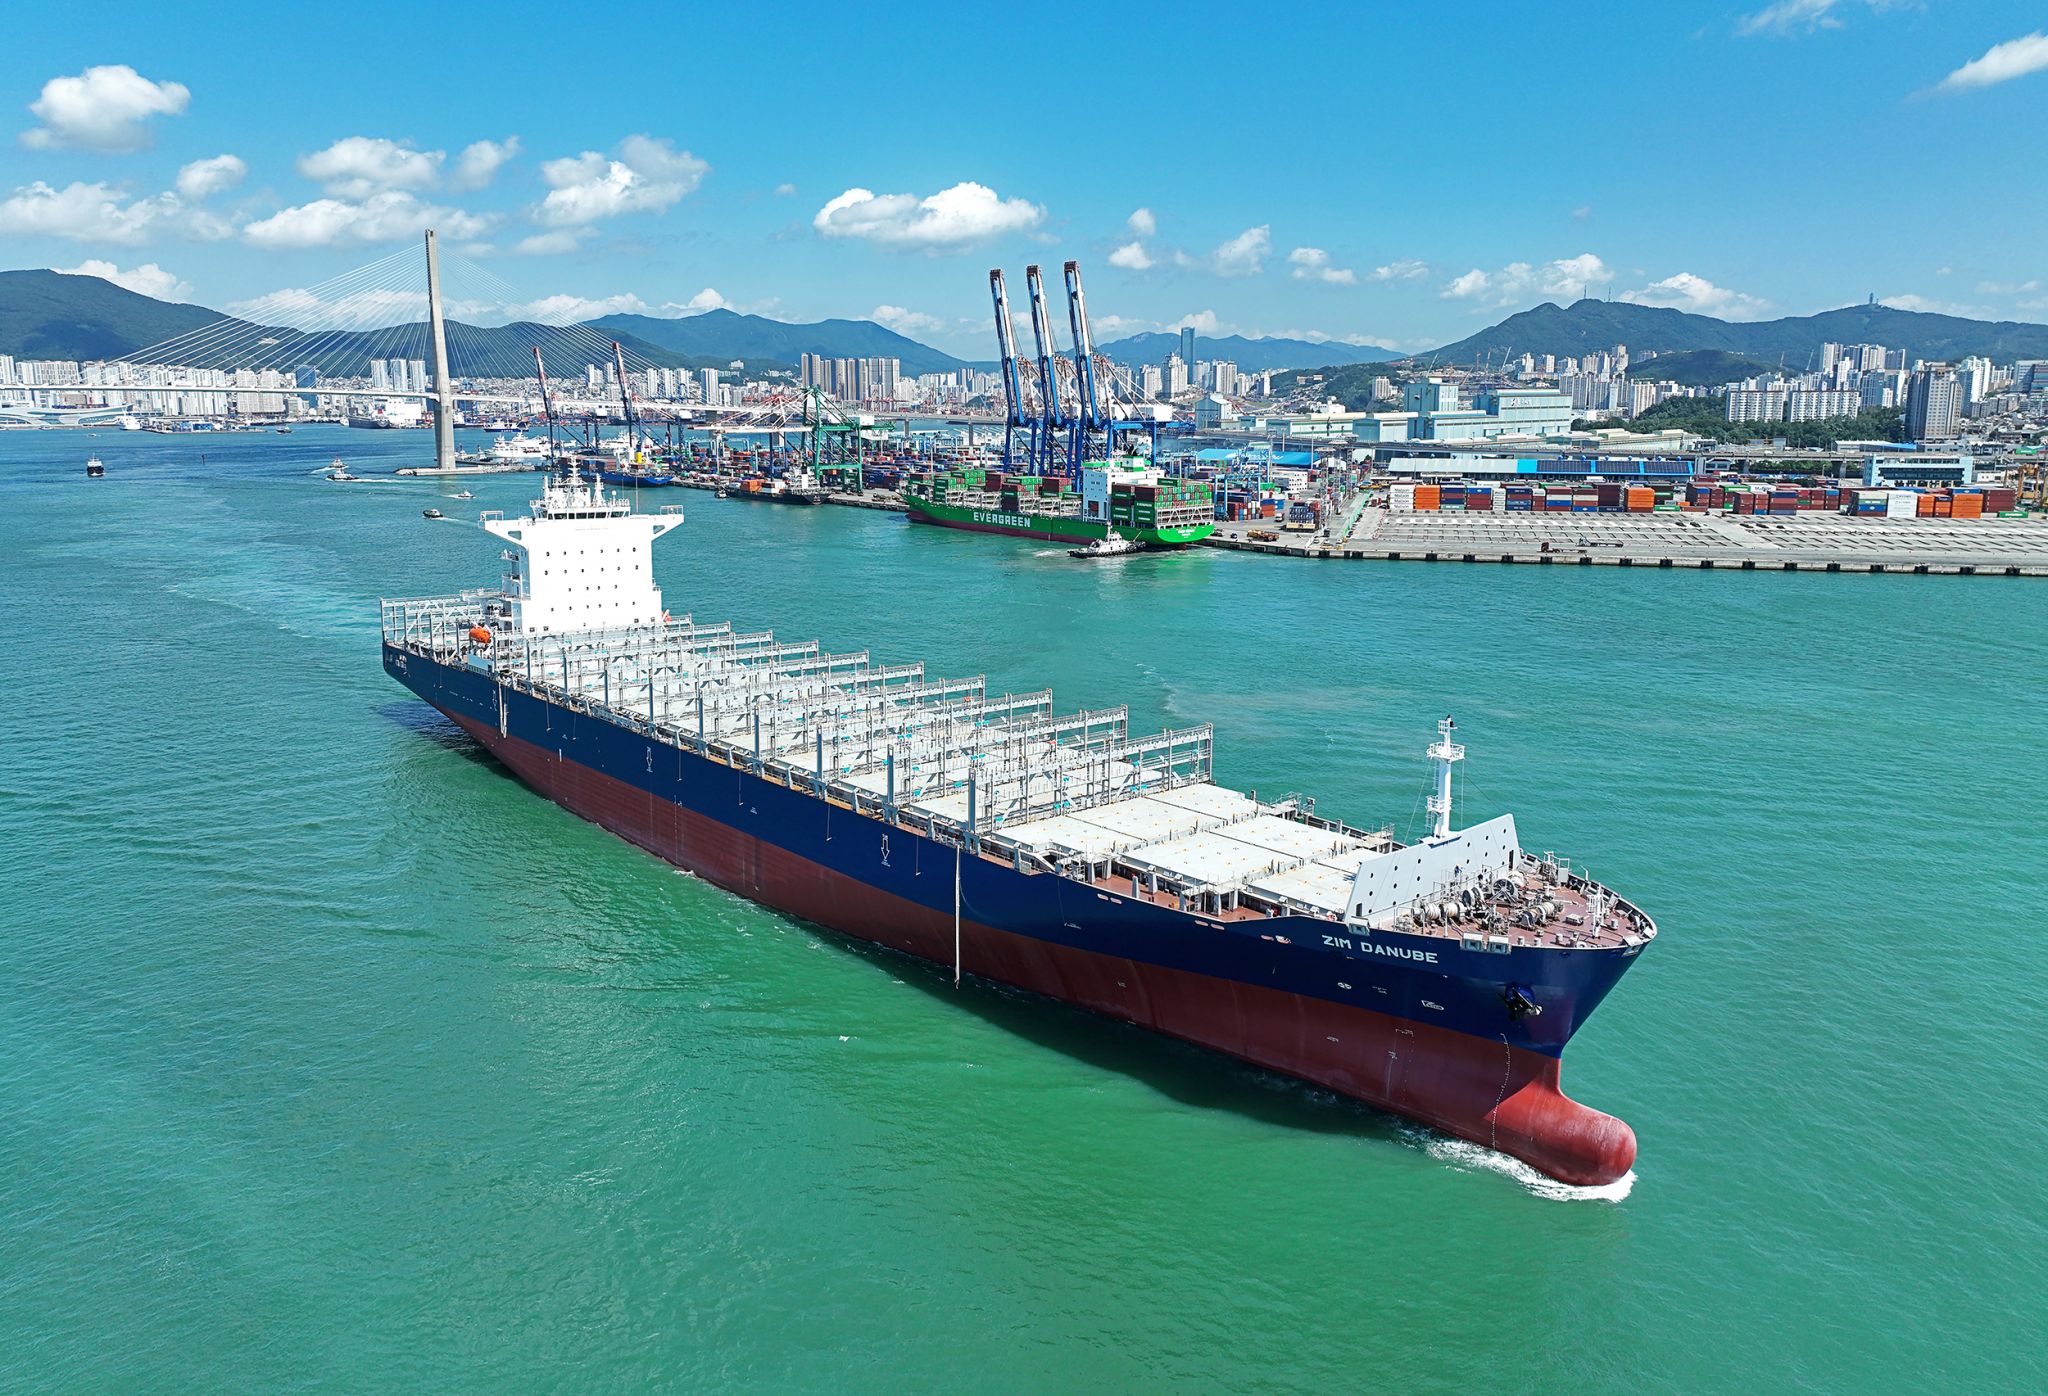 MPC Capital holds naming ceremony for methanol-ready boxships in Korea